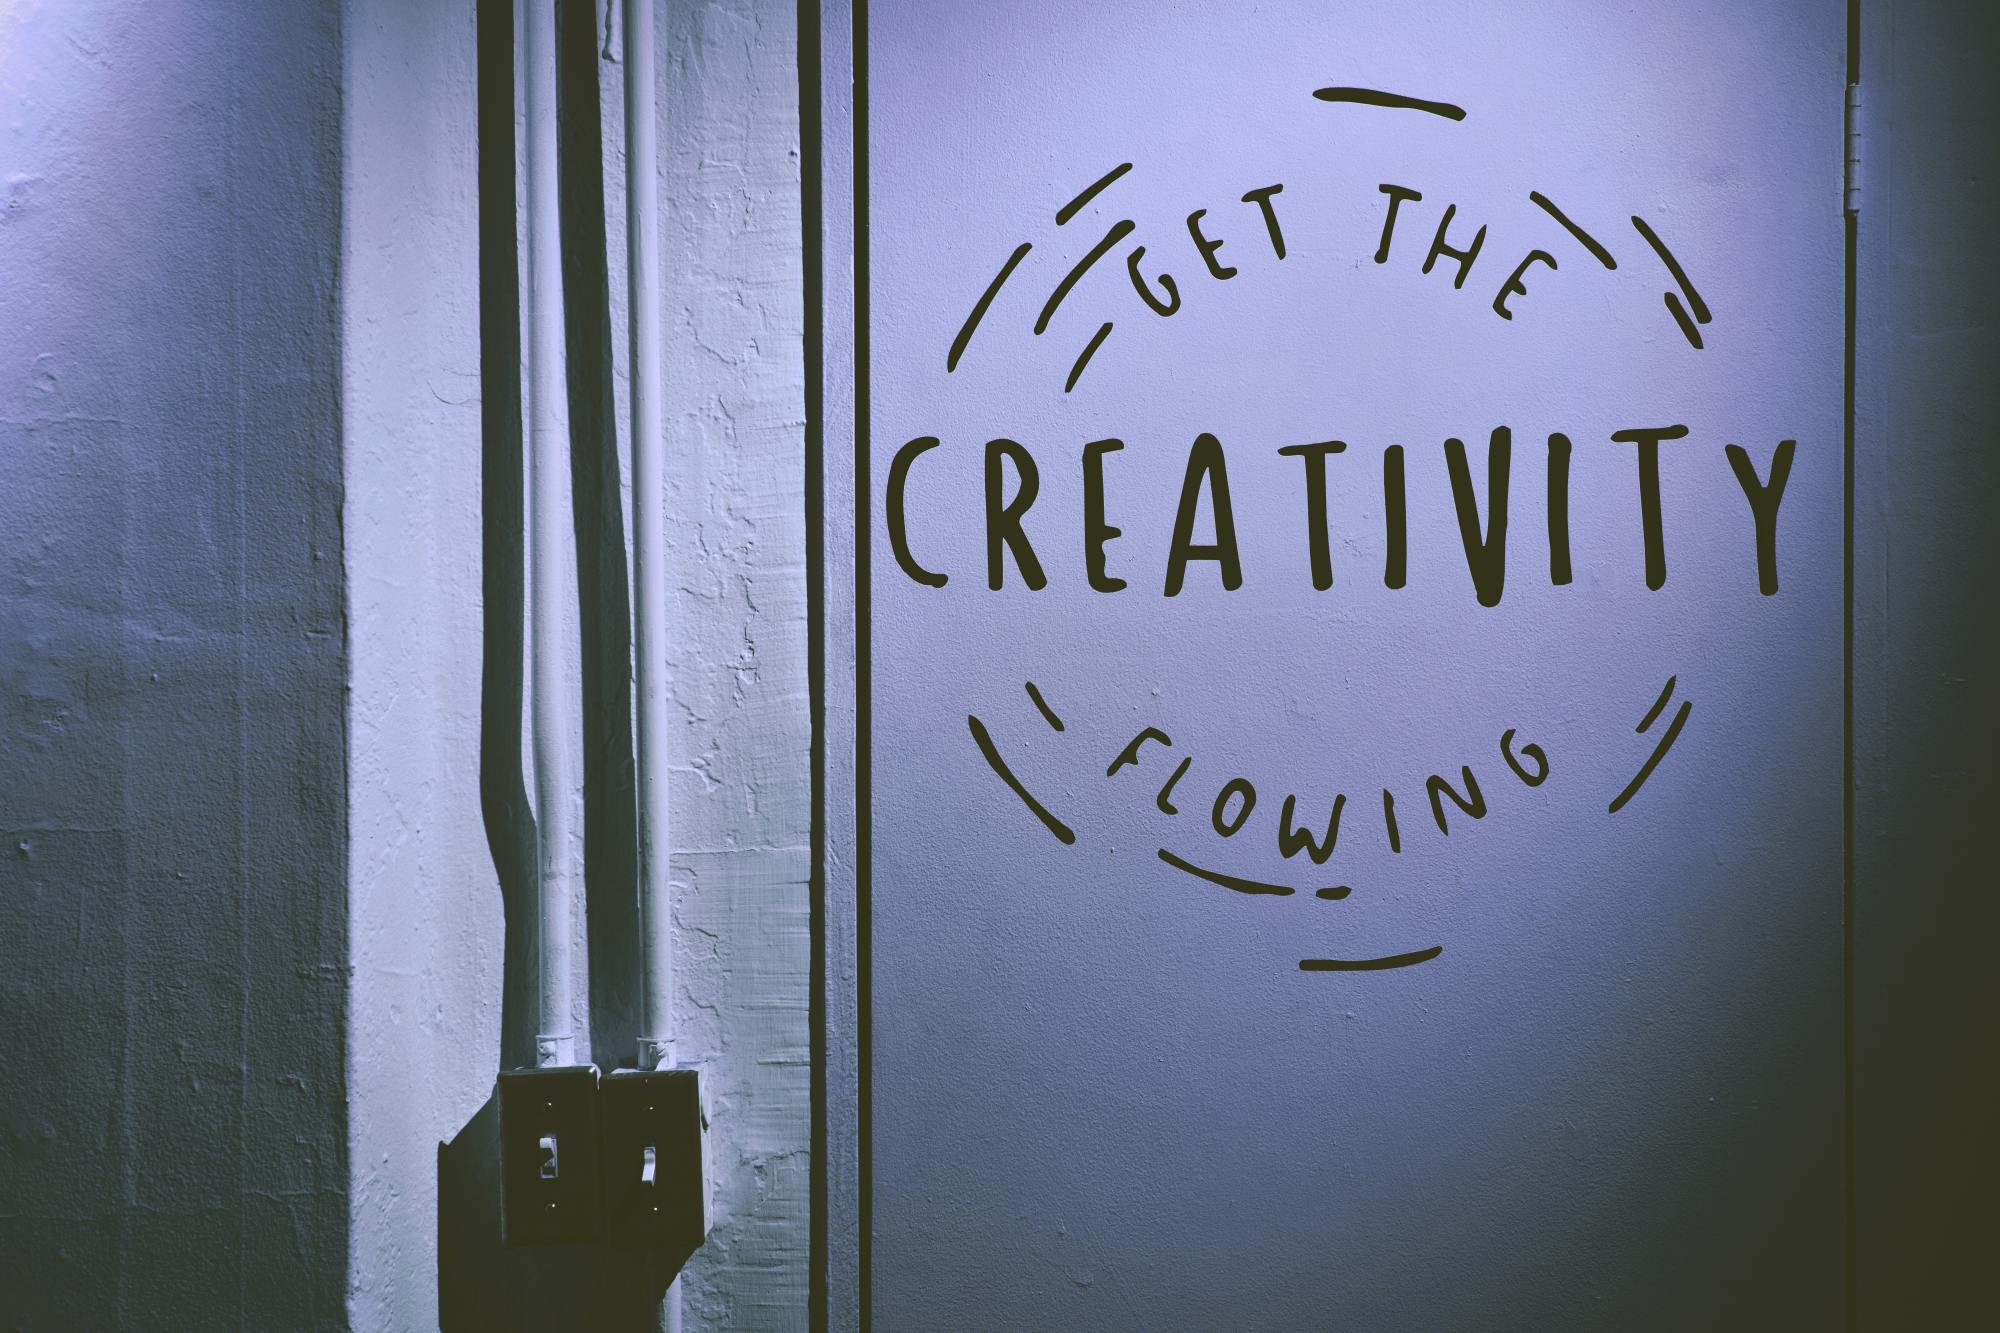 Artwork on a wall that says "Get the creativity flowing" to help avoid creative blocks at work